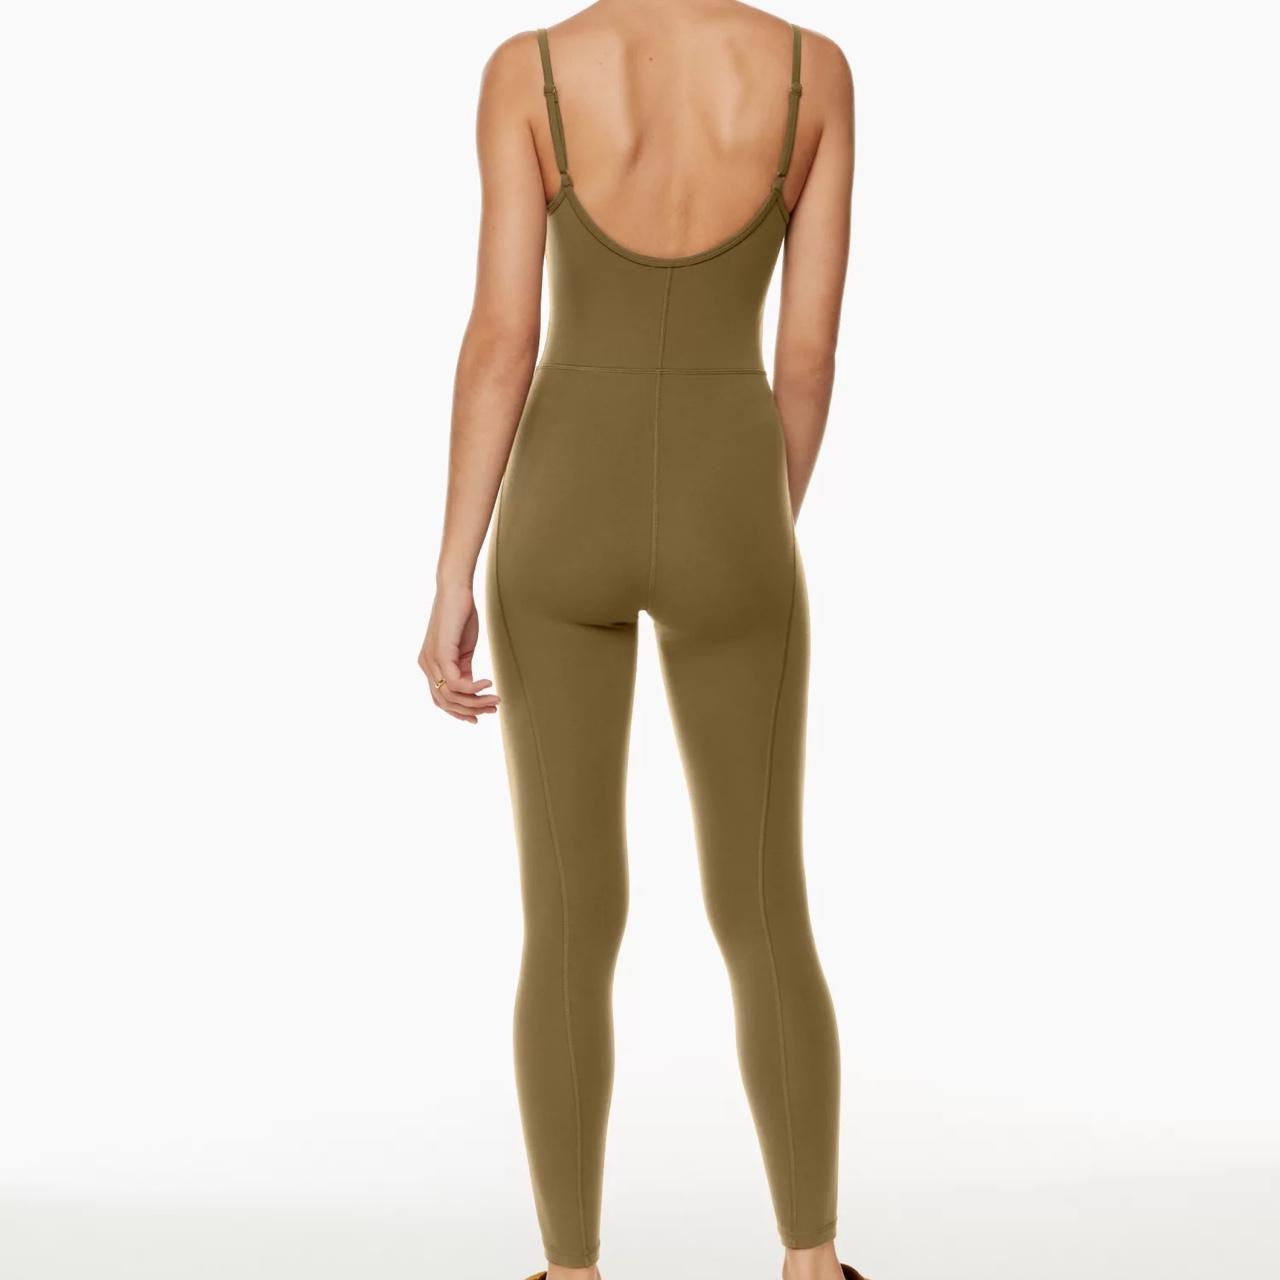 Wilfred Free DIVINITY FLARE JUMPSUIT Aritzia US, 43% OFF